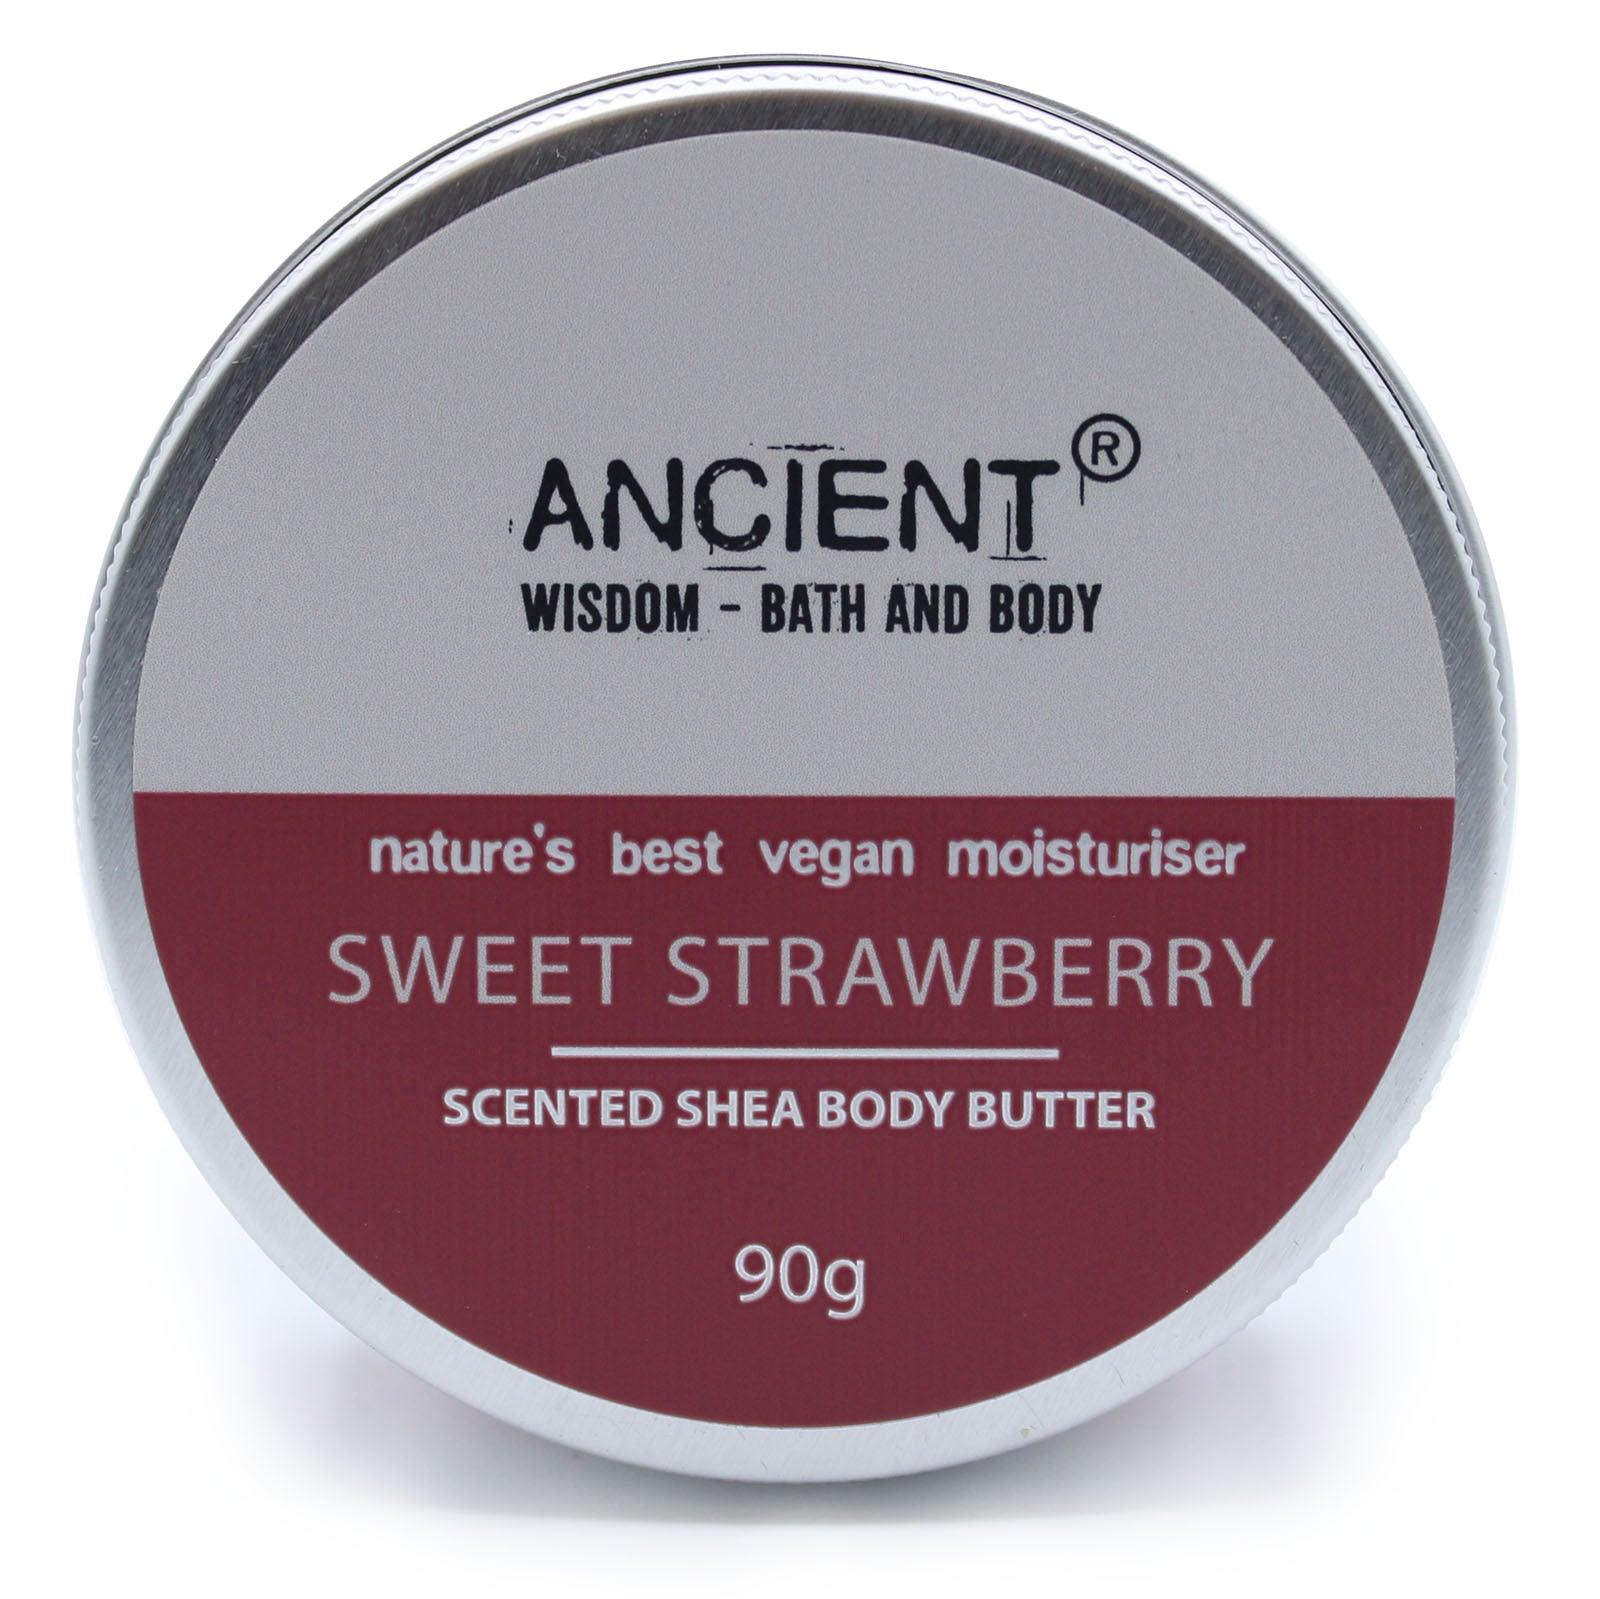 Scented Shea Body Butter 90g - Sweet Strawberry - DuvetDay.co.uk